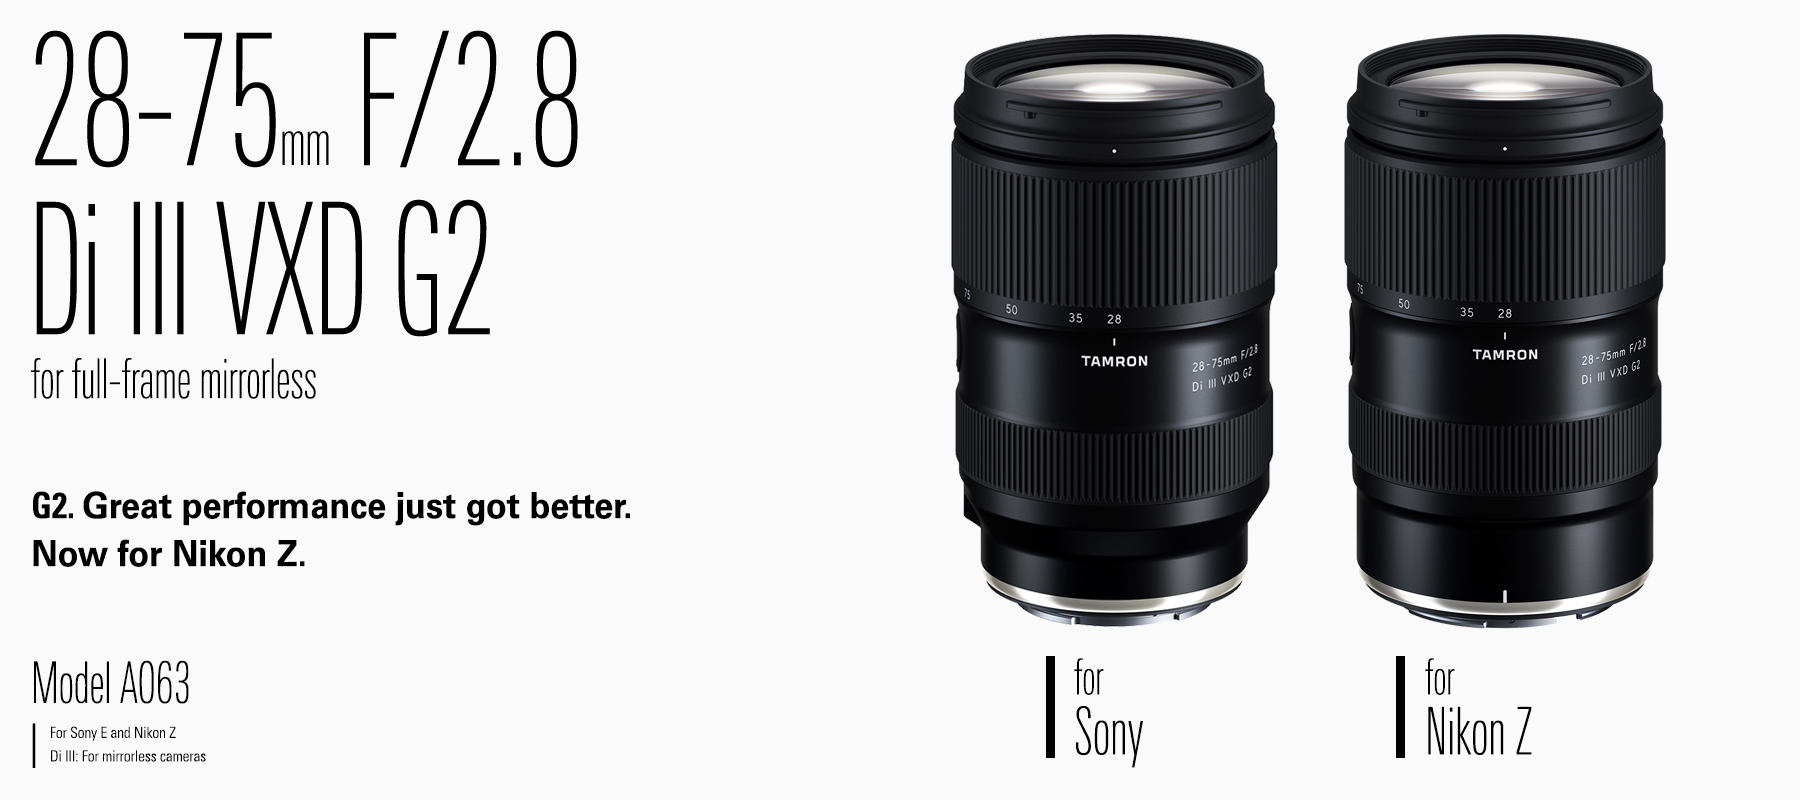 Product Page | 28-75mm F/2.8 Di III VXD G2 (Model A063) | E-mount |  Standard Zoom Lens - TAMRON